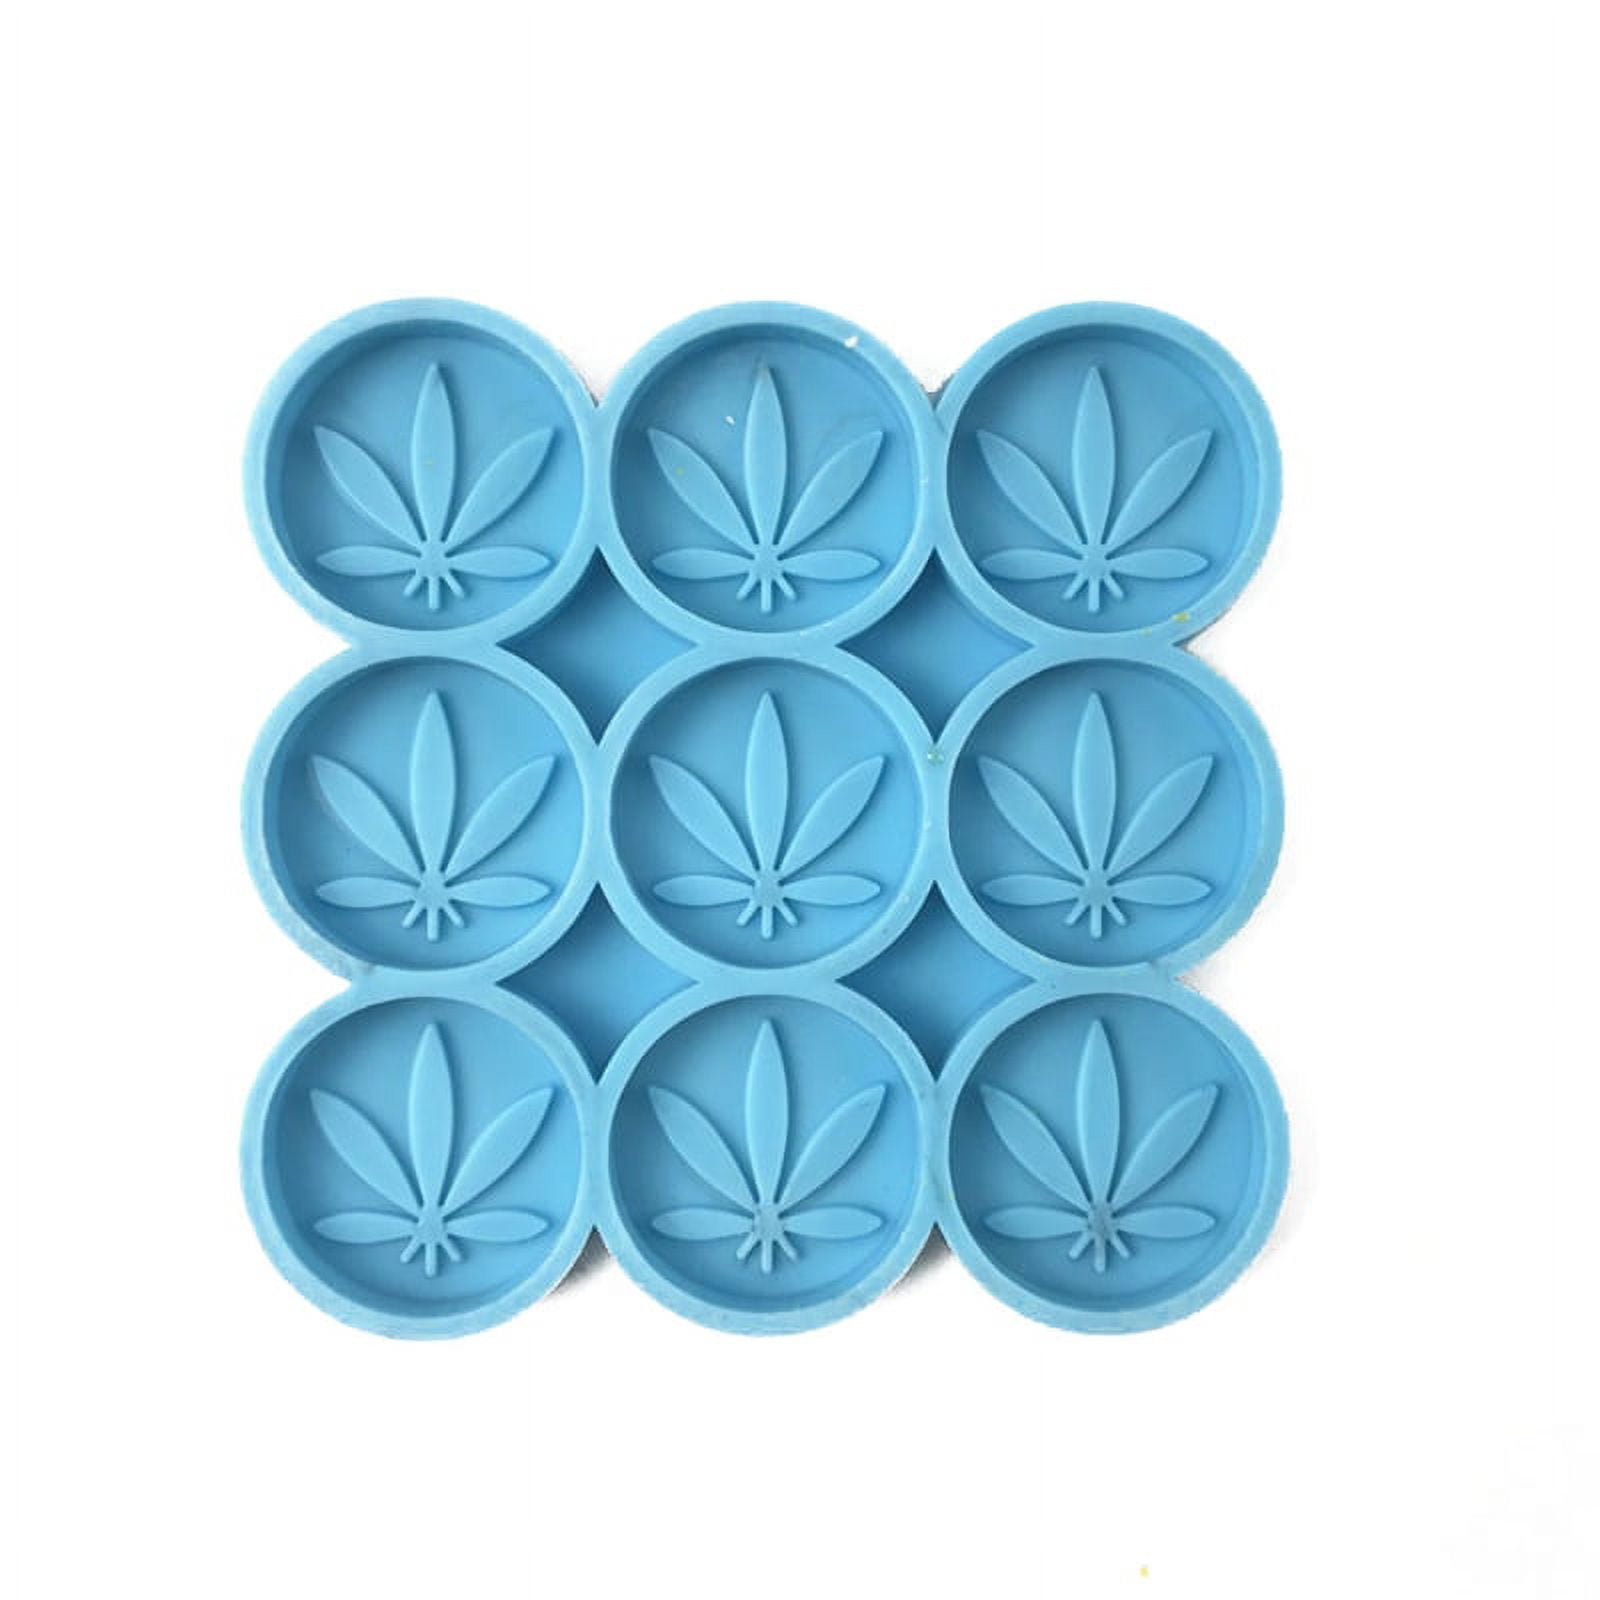 Grinder Resin Mold-weed Grinder Silicone Mold-grinder Leaf Mold-epoxy Resin  Molds for Jewelry-craft Supplies Mold 